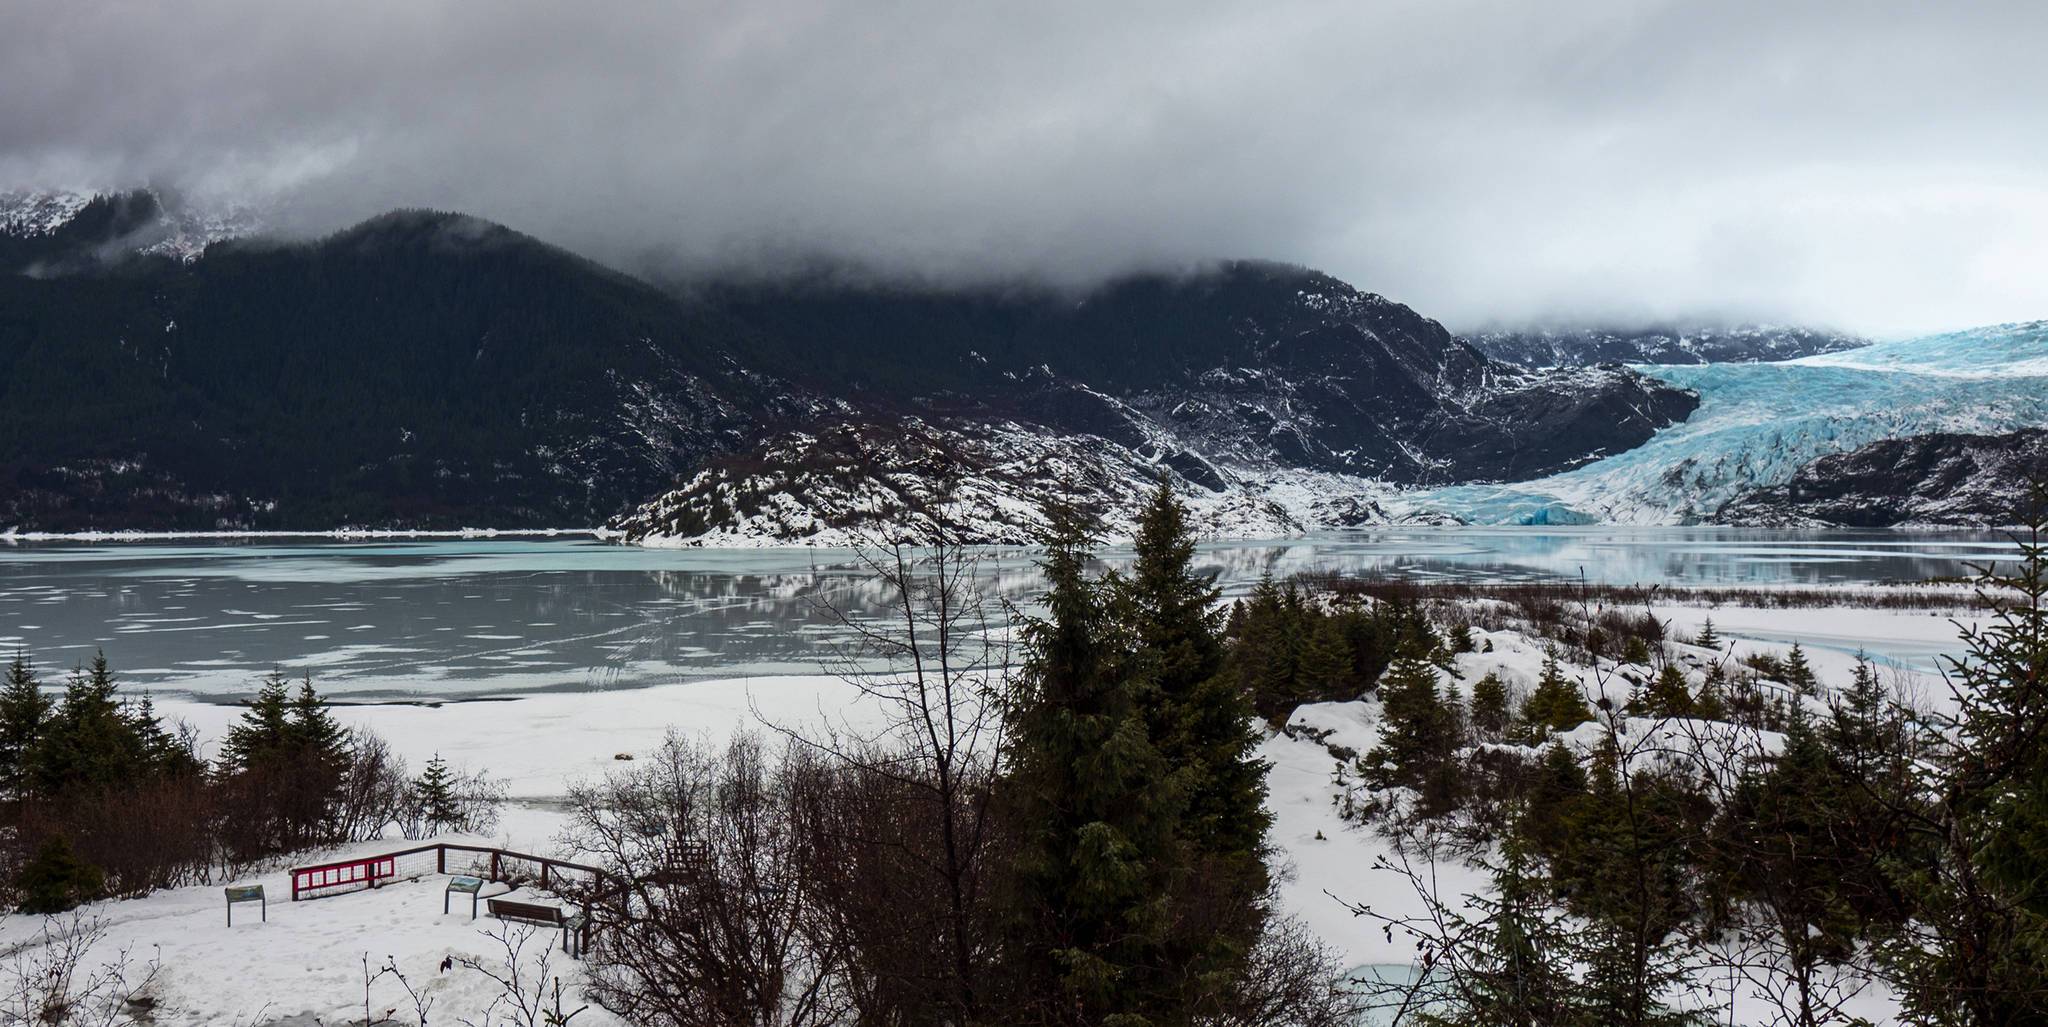 Reflections at the Mendenhall Glacier on Jan. 26, 2019. (Courtesy Photo | Janice Gorle)